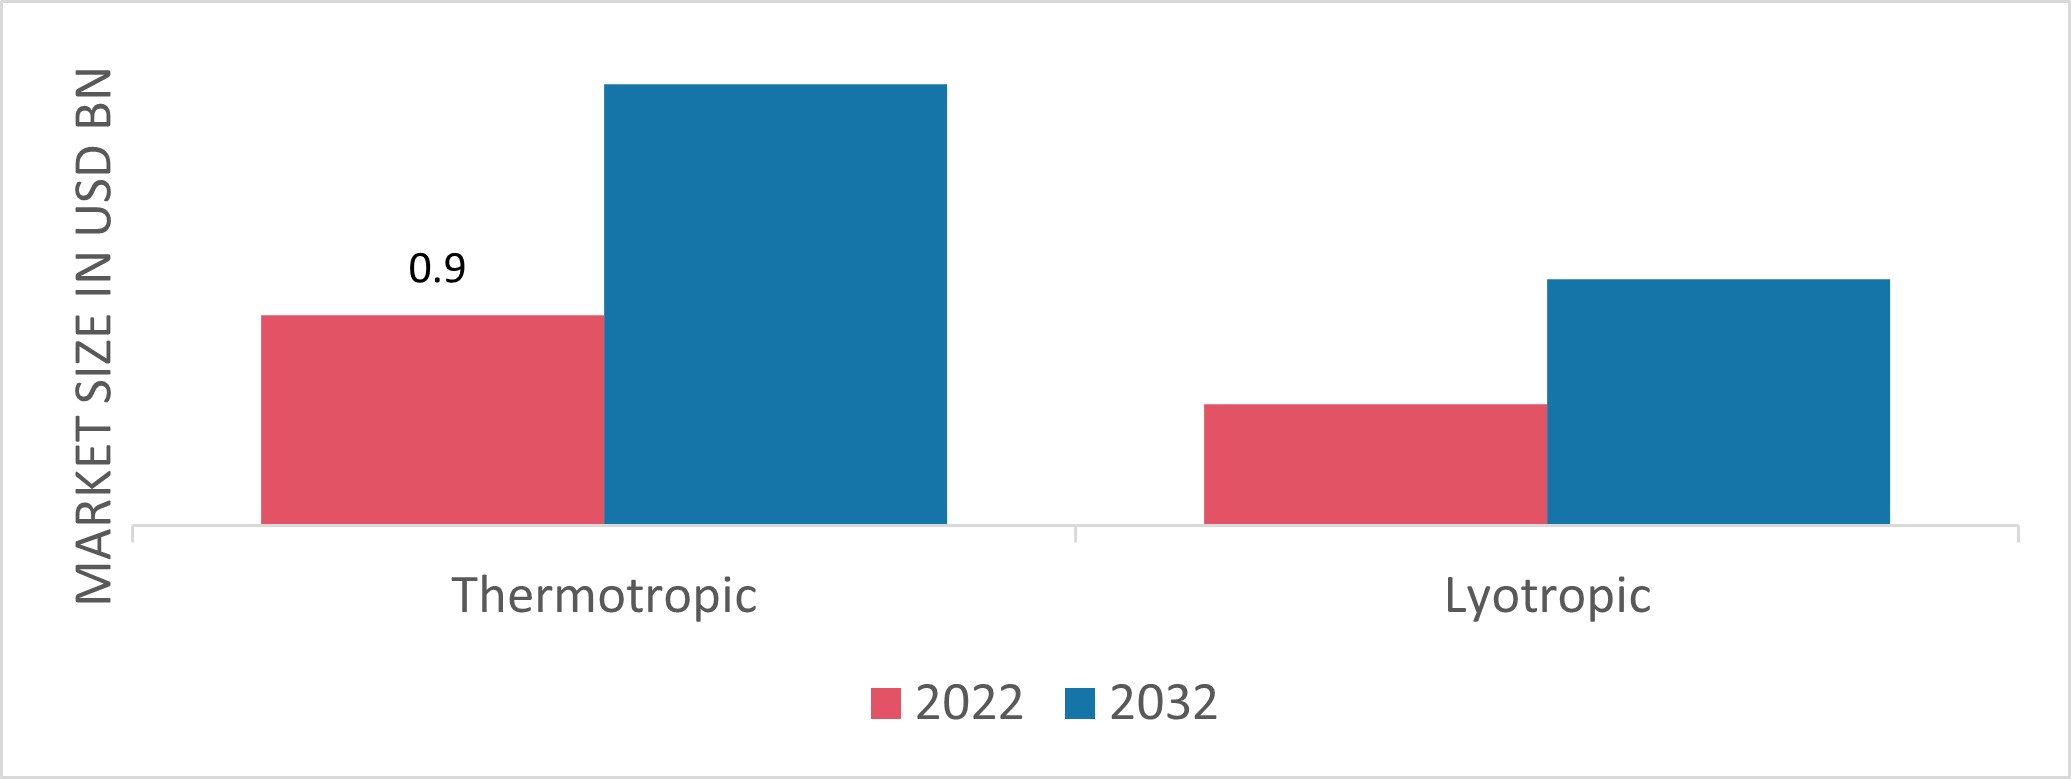 Liquid Crystal Polymers Market, by Type, 2022 & 2032